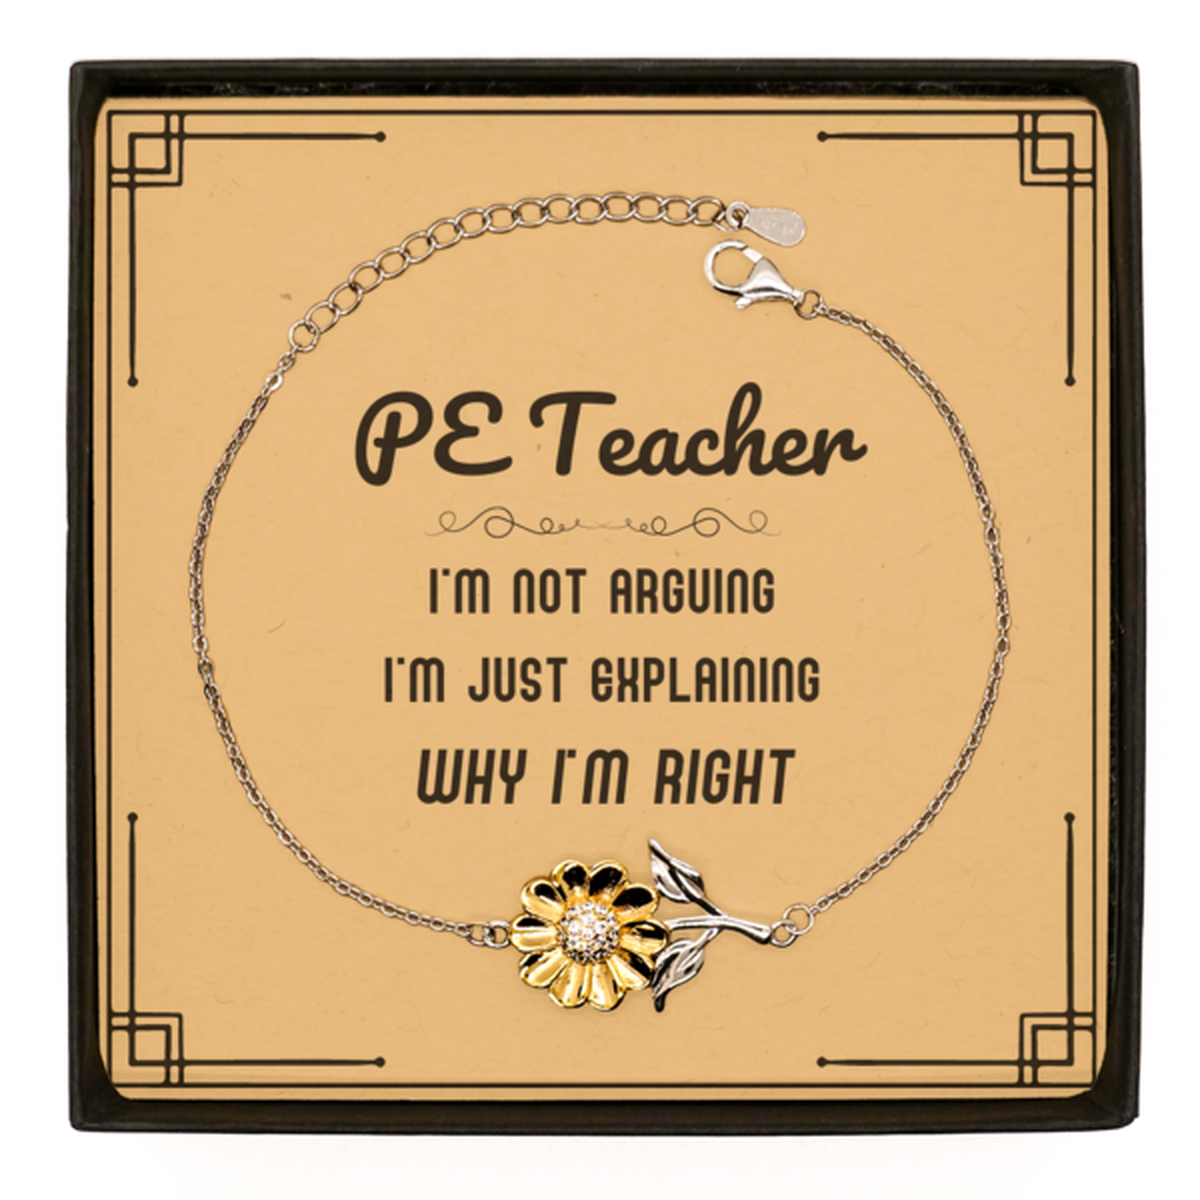 PE Teacher I'm not Arguing. I'm Just Explaining Why I'm RIGHT Sunflower Bracelet, Funny Saying Quote PE Teacher Gifts For PE Teacher Message Card Graduation Birthday Christmas Gifts for Men Women Coworker